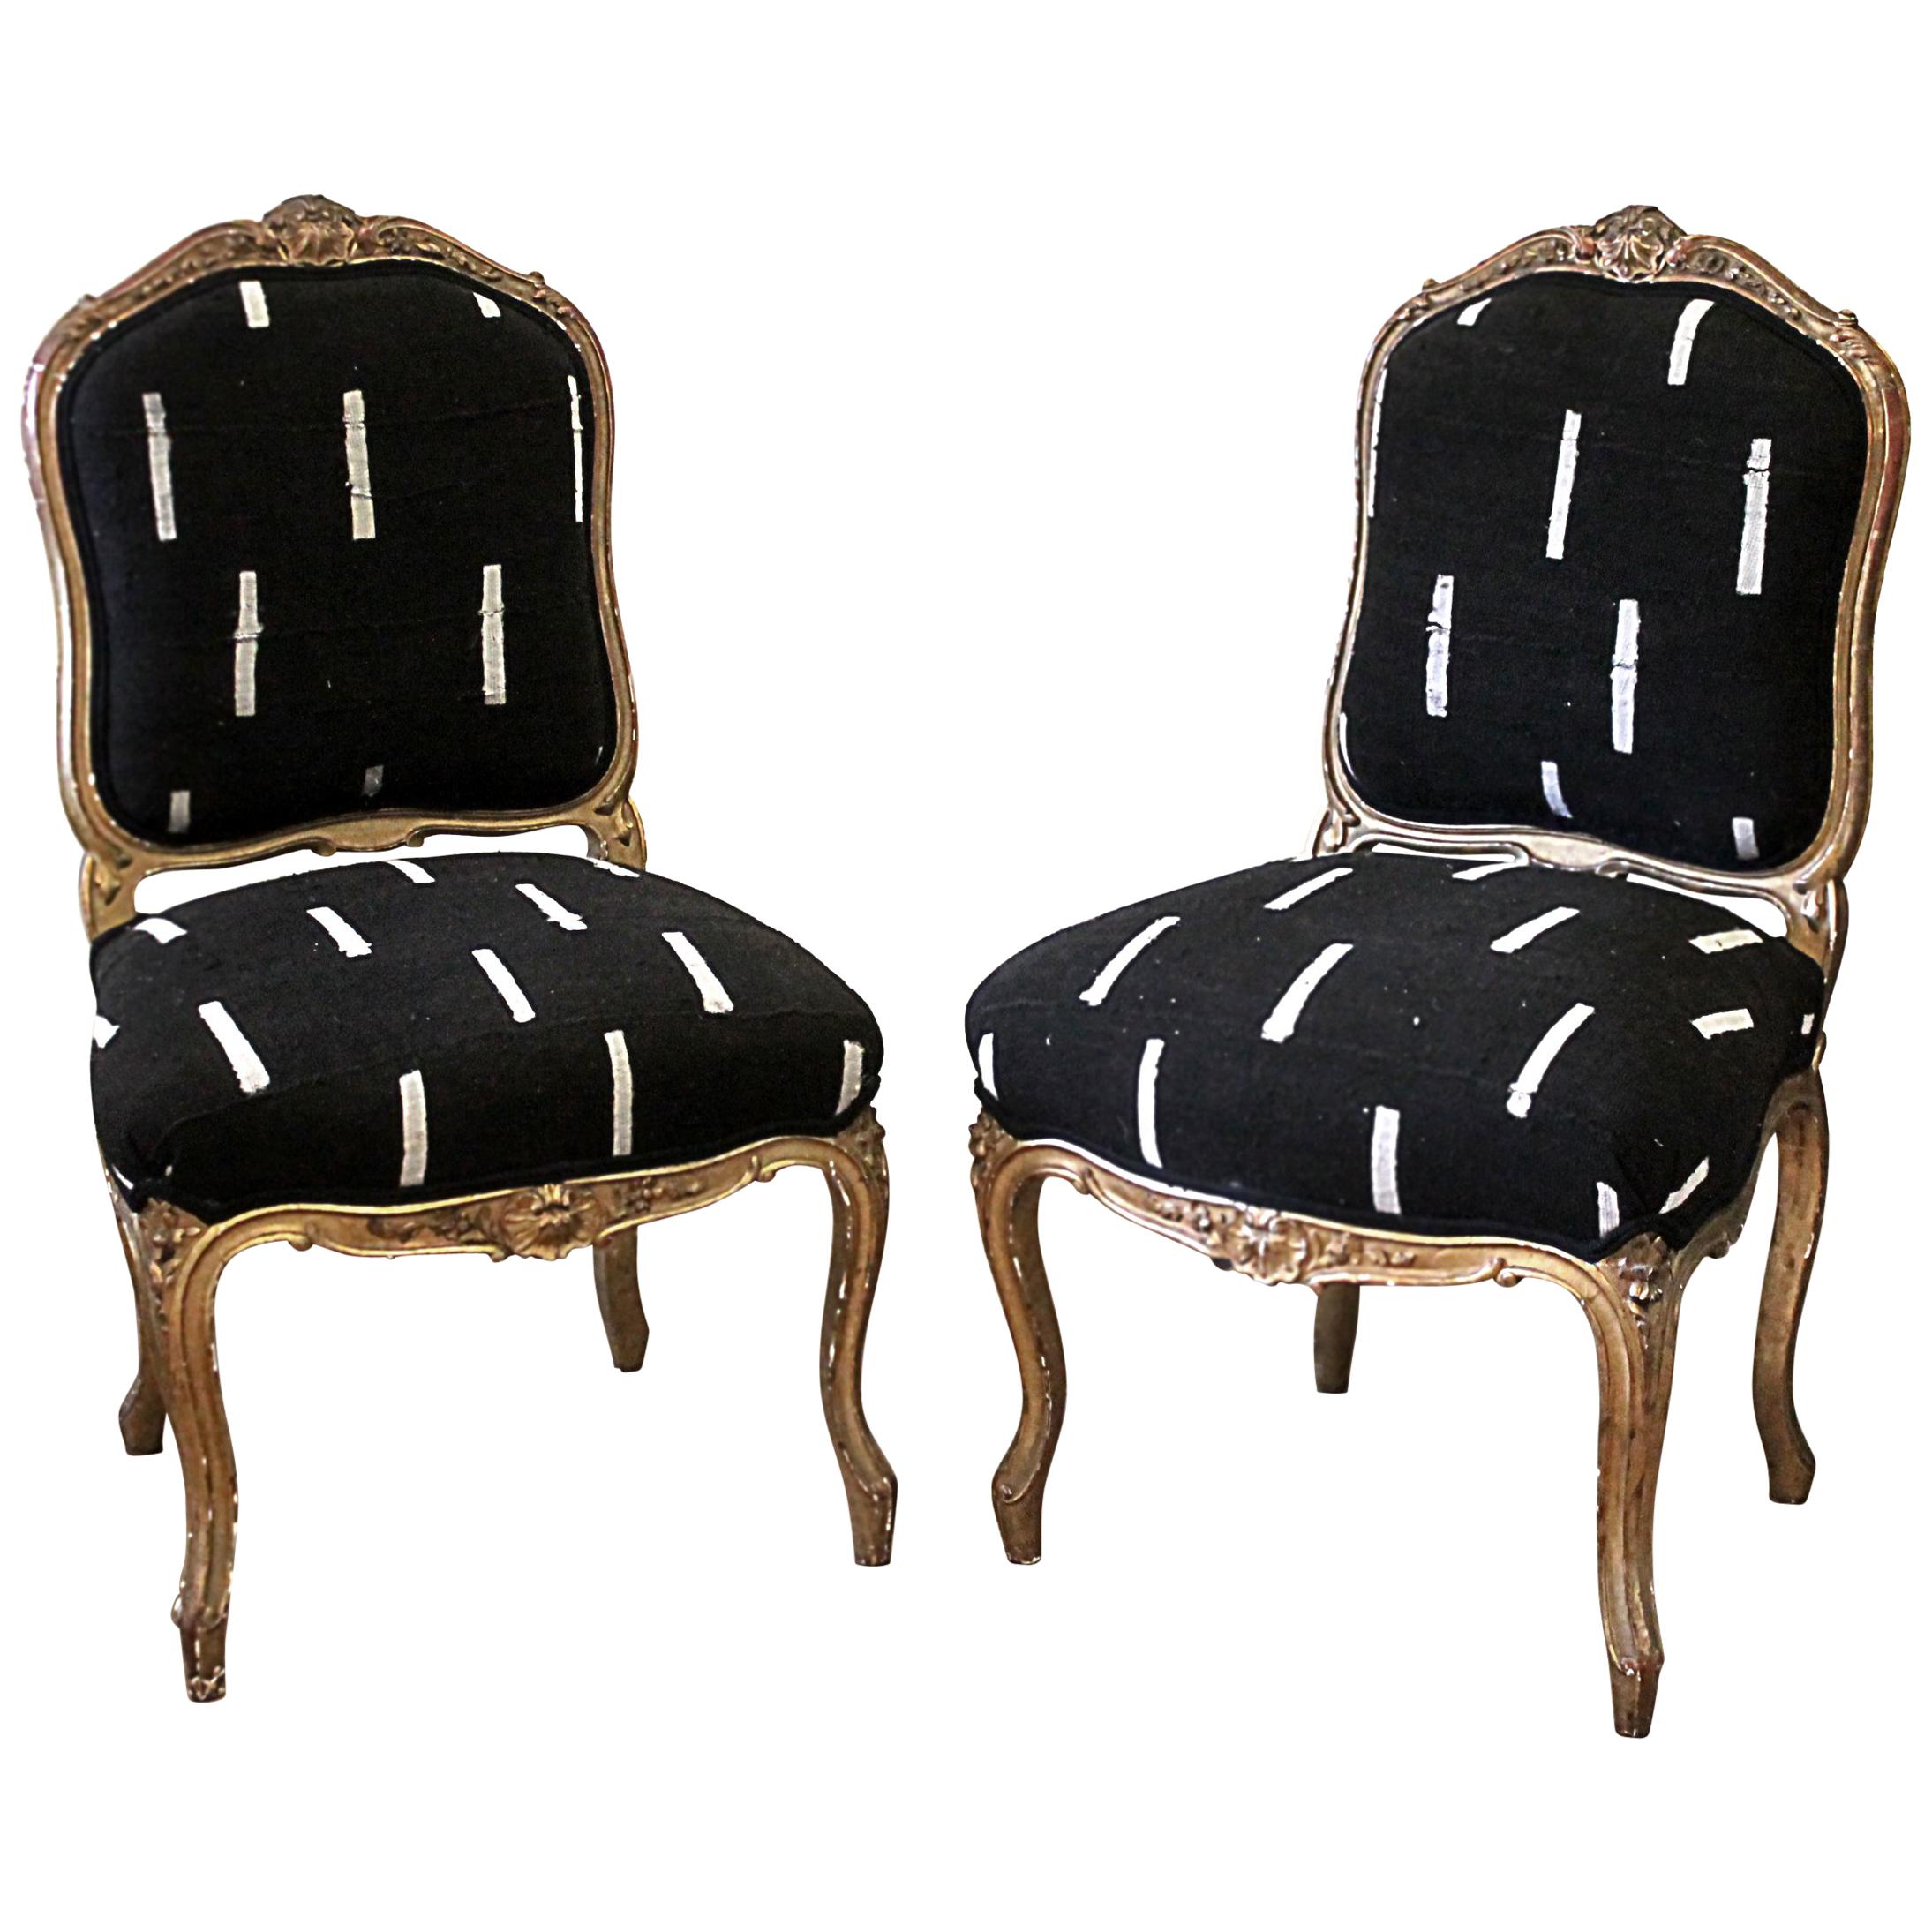 Late 19th Century Giltwood Louis XV Style French Chairs in Vintage Upholstery